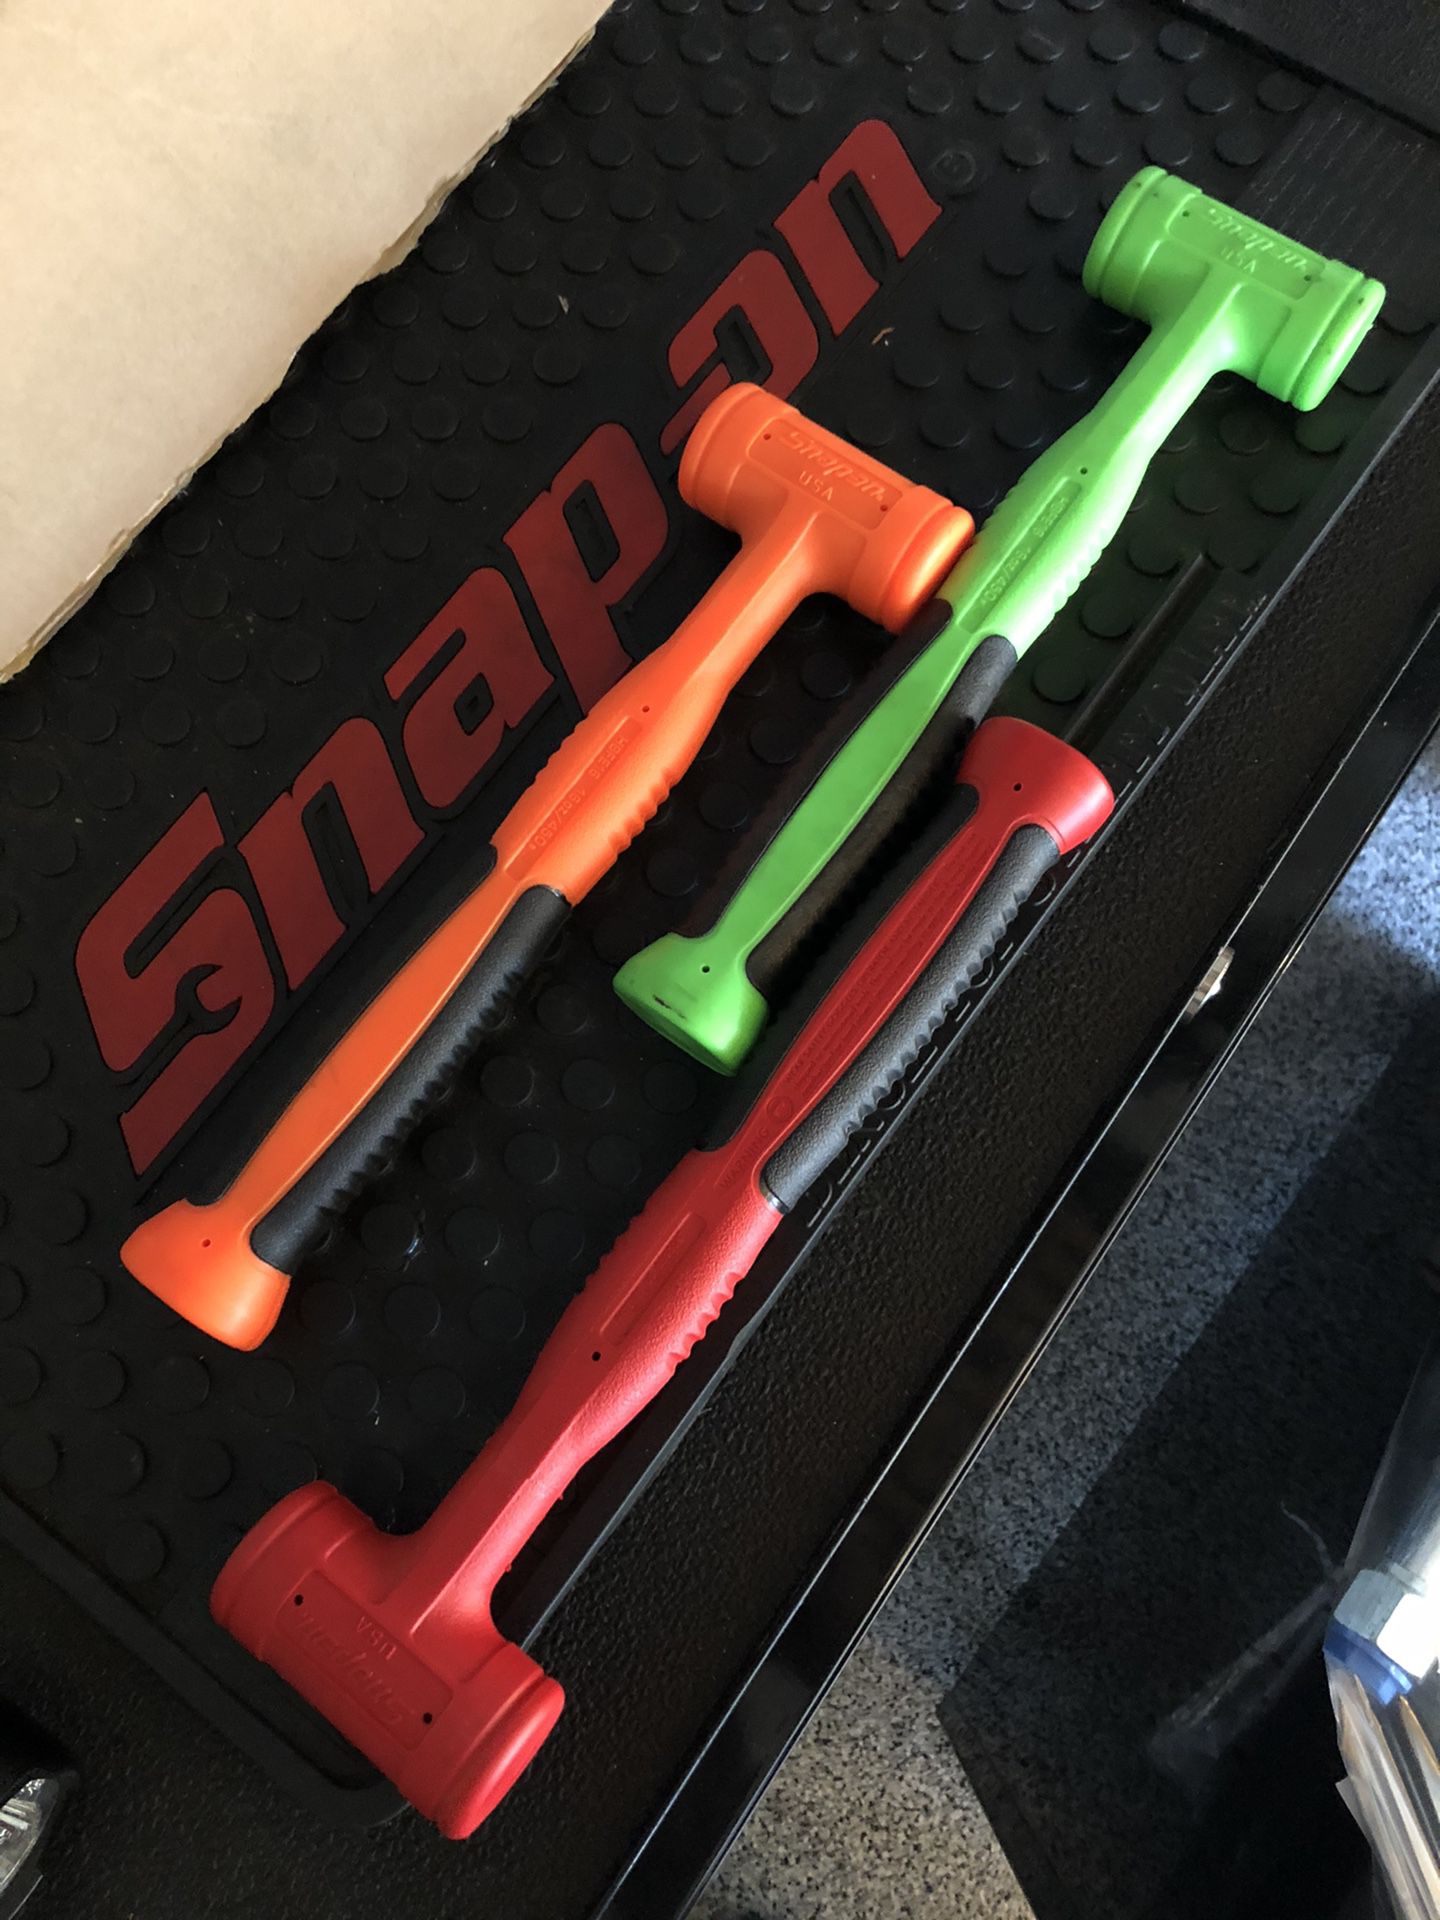 Snap on. Brand new dead blow hammers $50 each FIRM